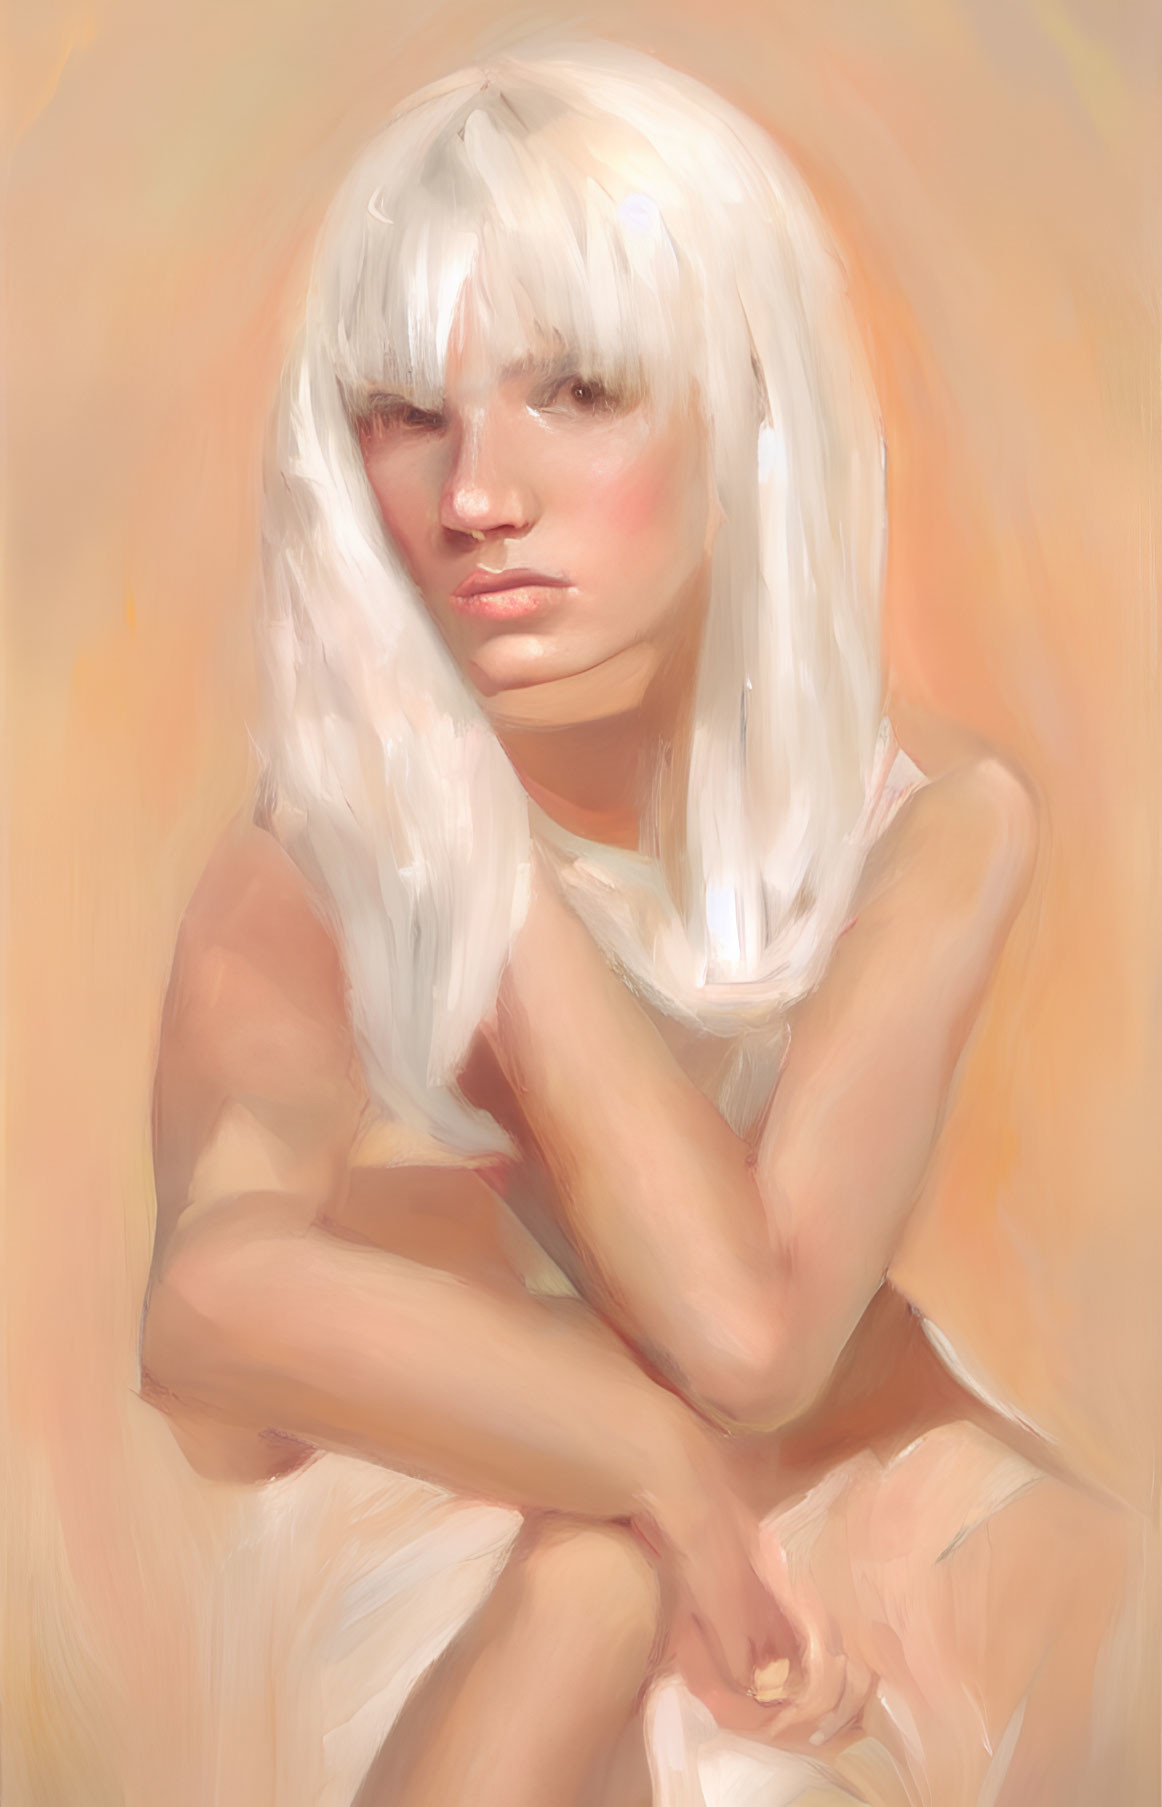 Platinum Blonde Hair Person Painting on Warm Background